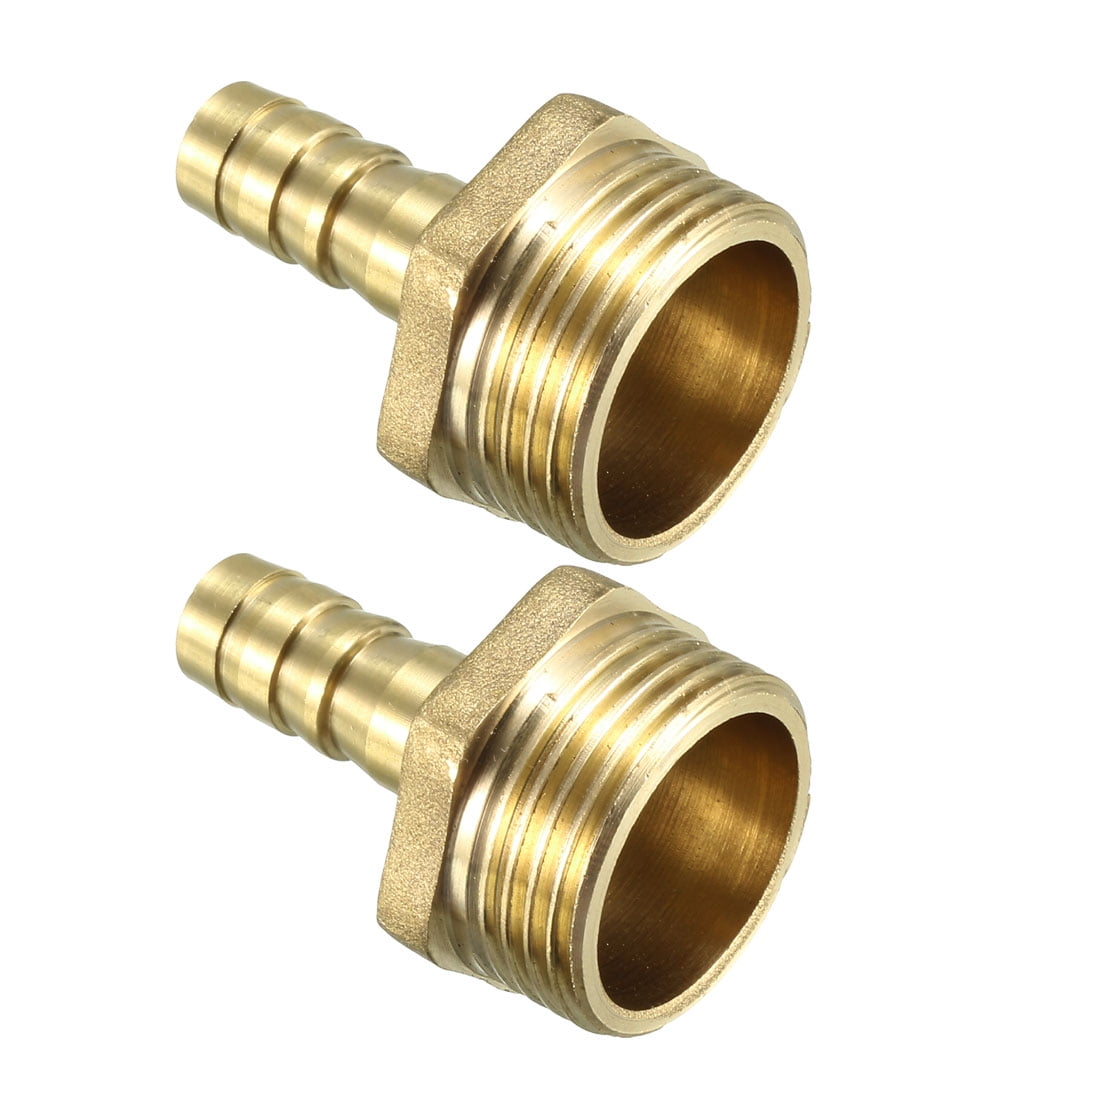 Nickel-Plated Copper 2pcs sourcing map Pipe Fitting Tee G1/2 Male Thread 3 Way T Shape Hose Connector Adapter